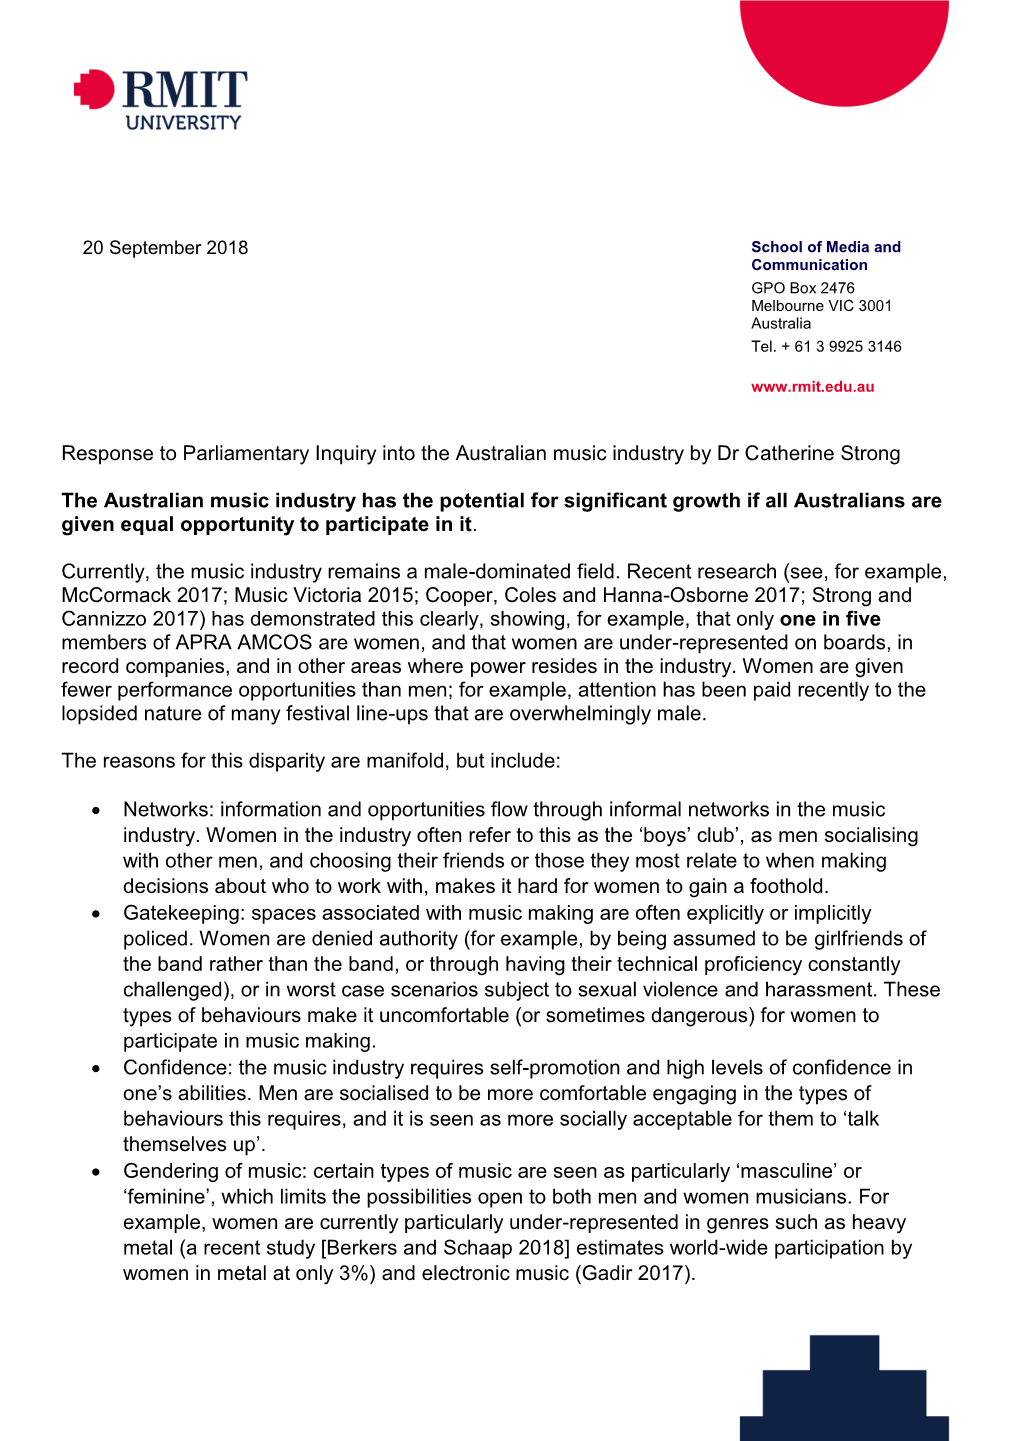 Response to Parliamentary Inquiry Into the Australian Music Industry by Dr Catherine Strong